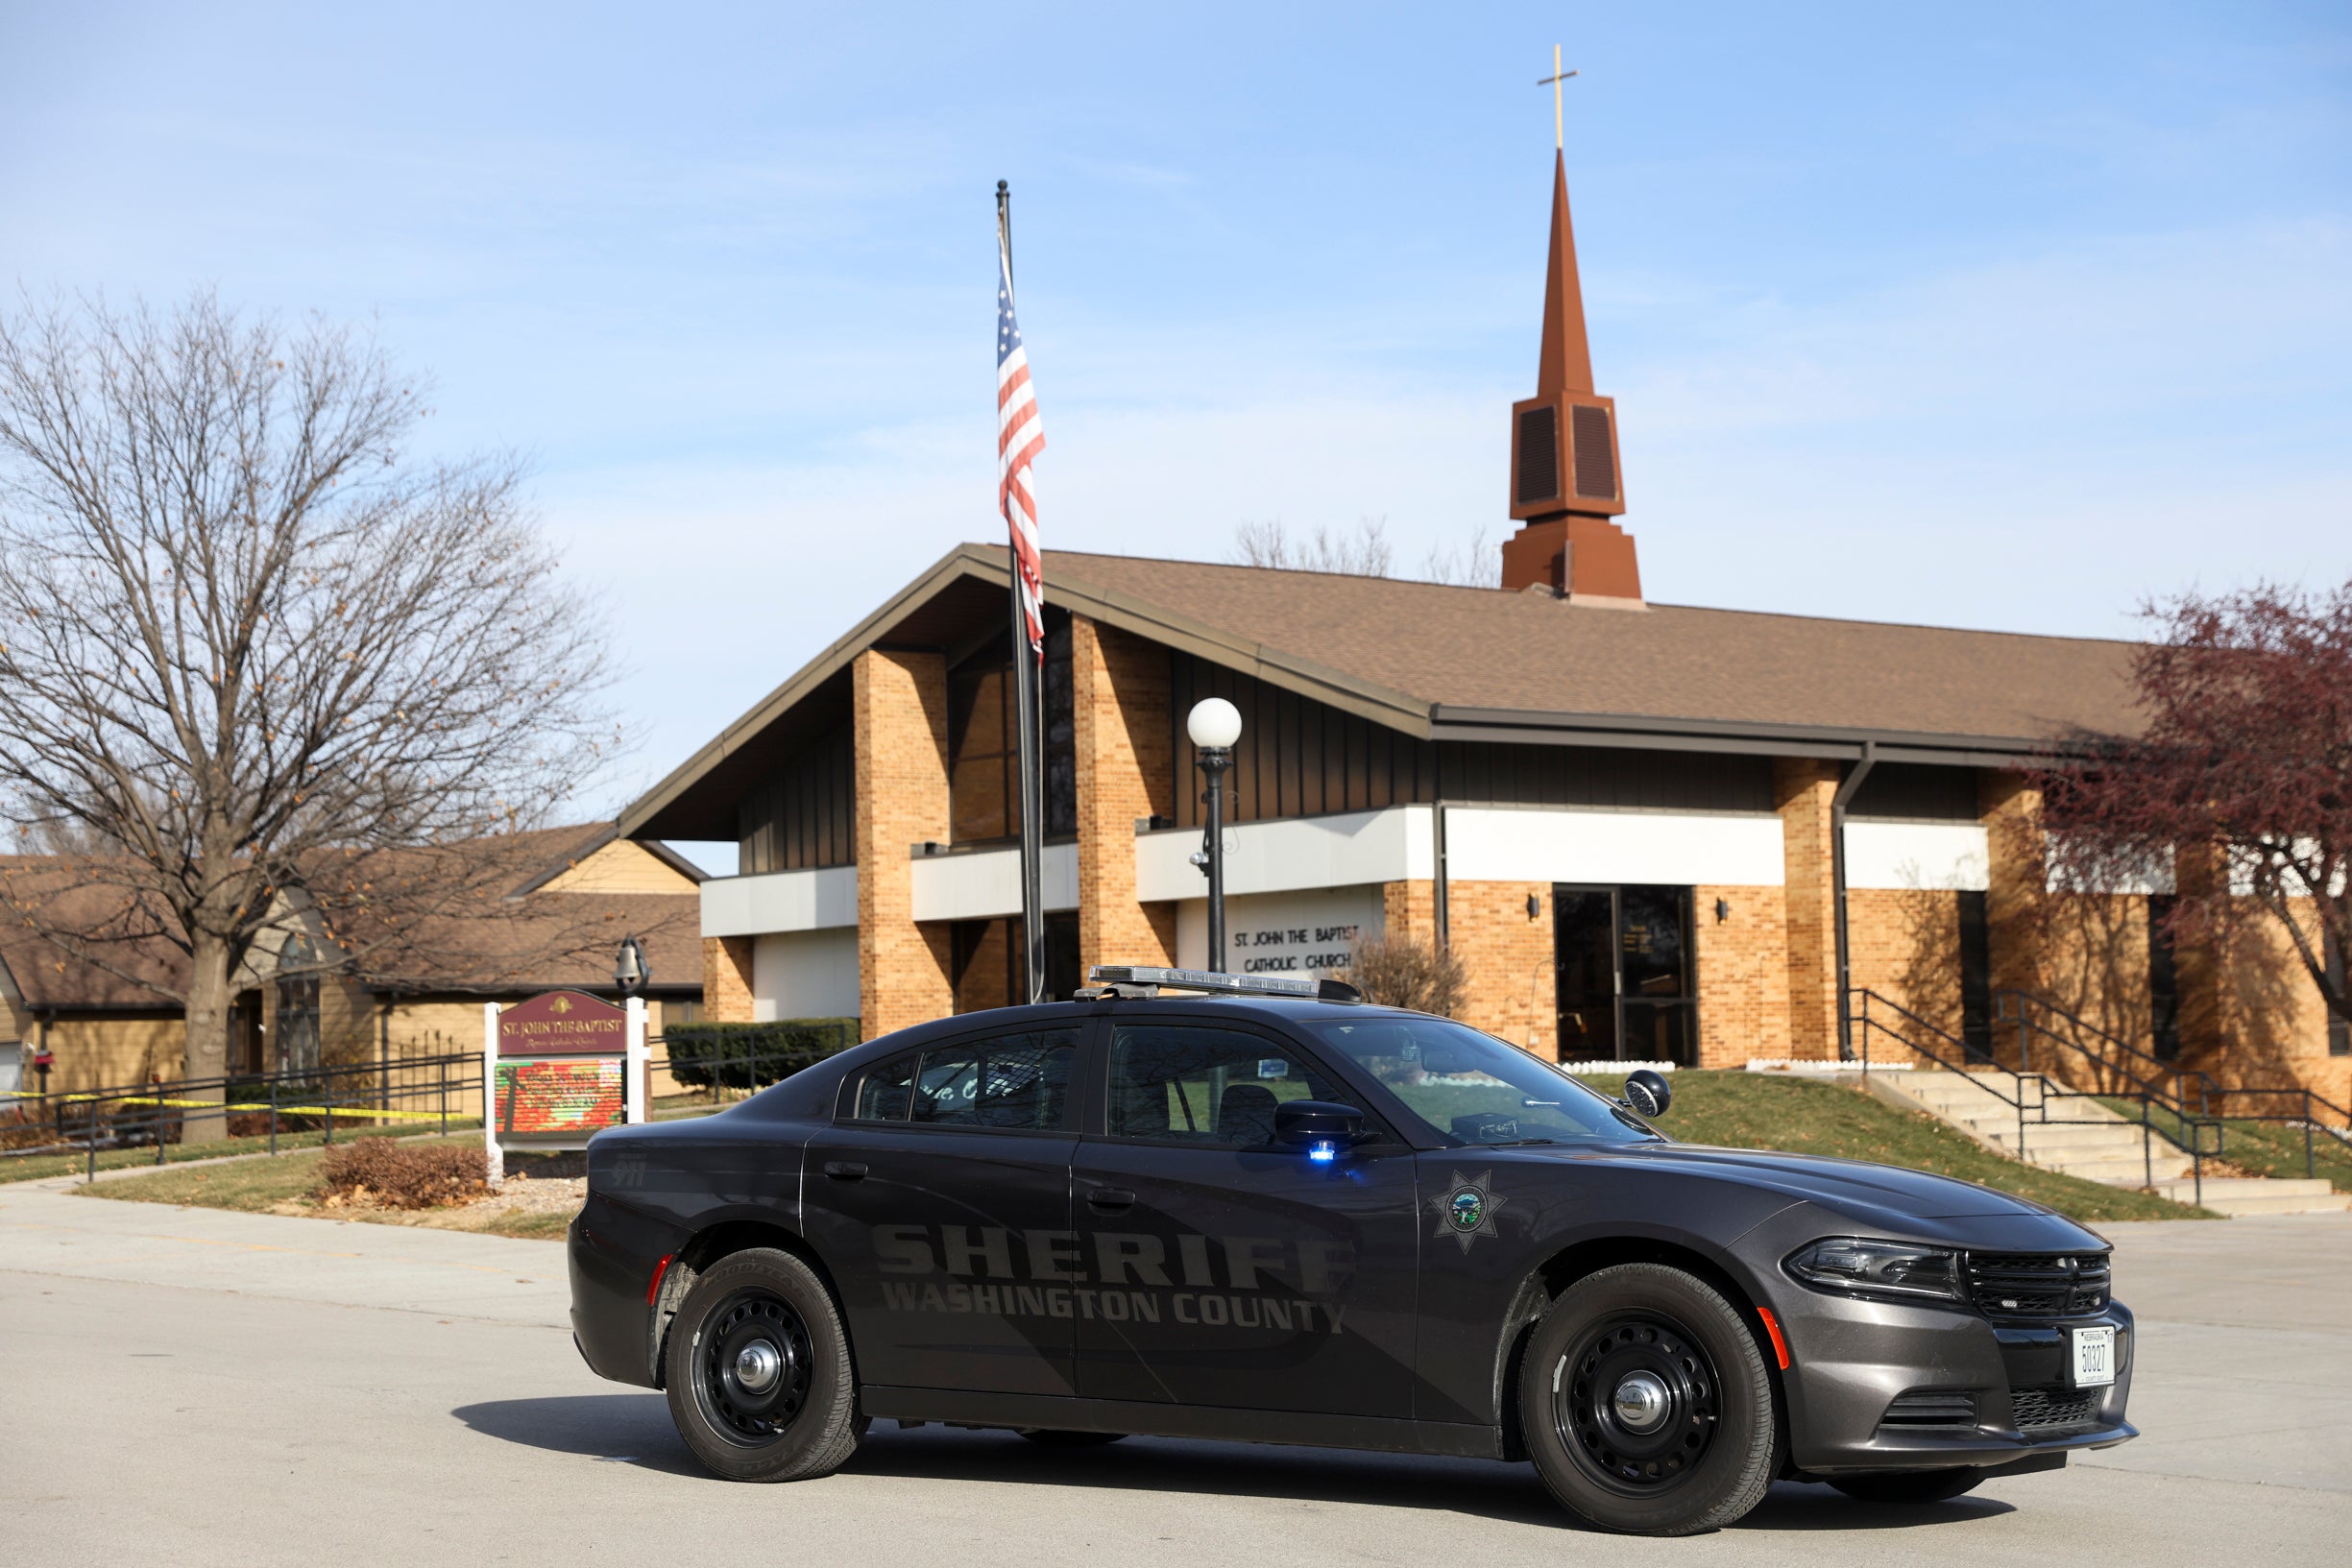 The Washington County Sheriff's office investigates the scene of a fatal stabbing on a Catholic priest in the rectory of St. John the Baptist Church